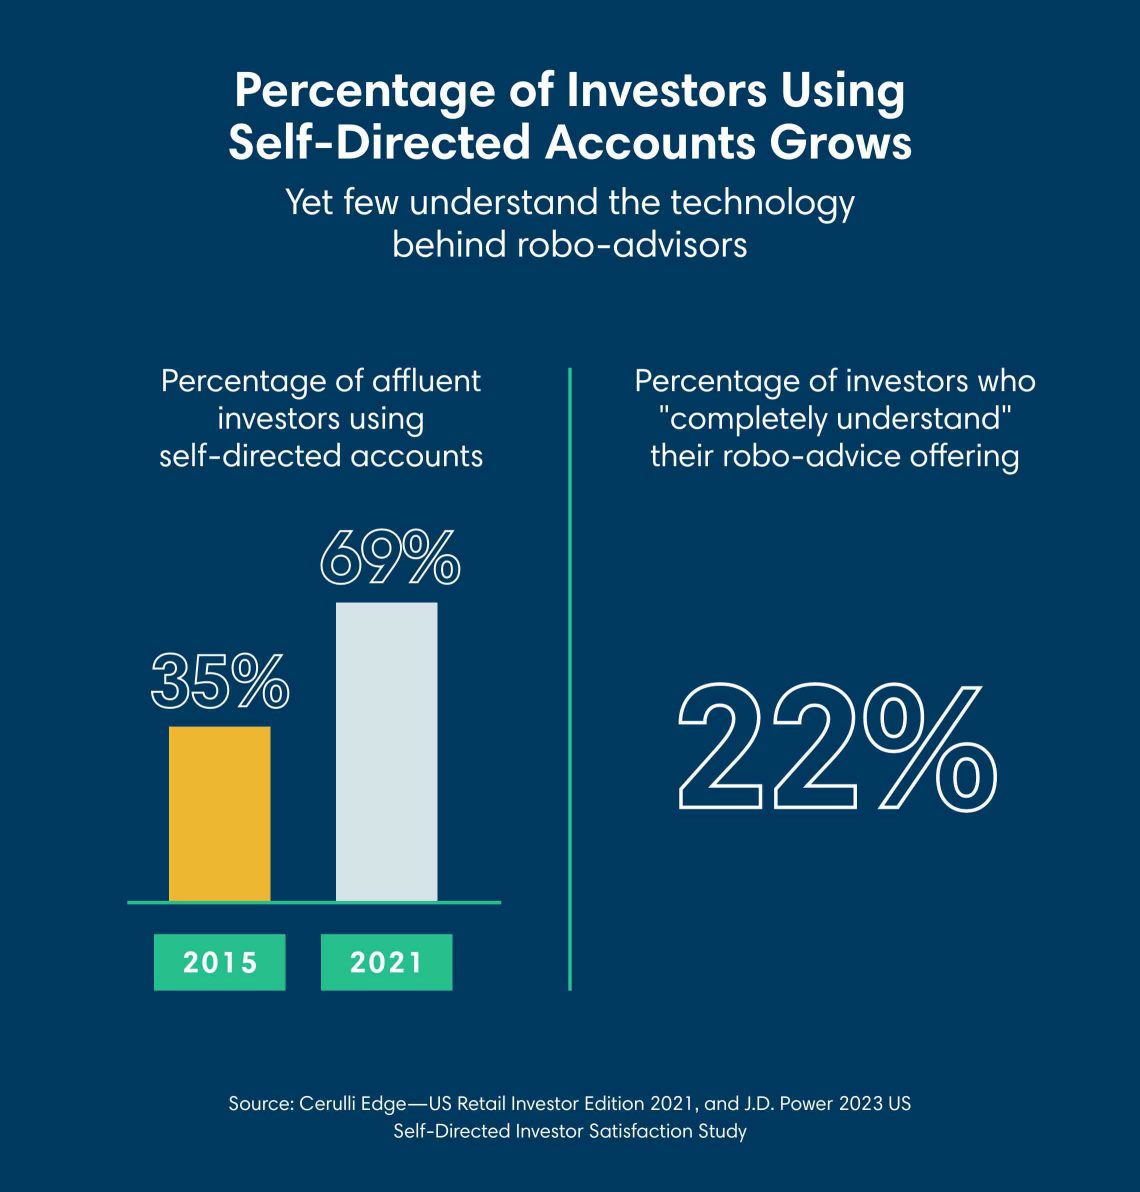 Percentage of investors using self-directed accounts grows, yet few understand the technology behind robo-advisors. Percentage of affluent investors using self-directed accounts rose from 35% in 2015 to 69% in 2021, while percentage of investors who completely understand their robo-advice offering stood at only 22% in 2023, according to the 2021 edition of the US Investor Edition from Cerulli Associates, a financial industry consultant, and JD Power's annual Self-Directed Investor Satisfaction Study.